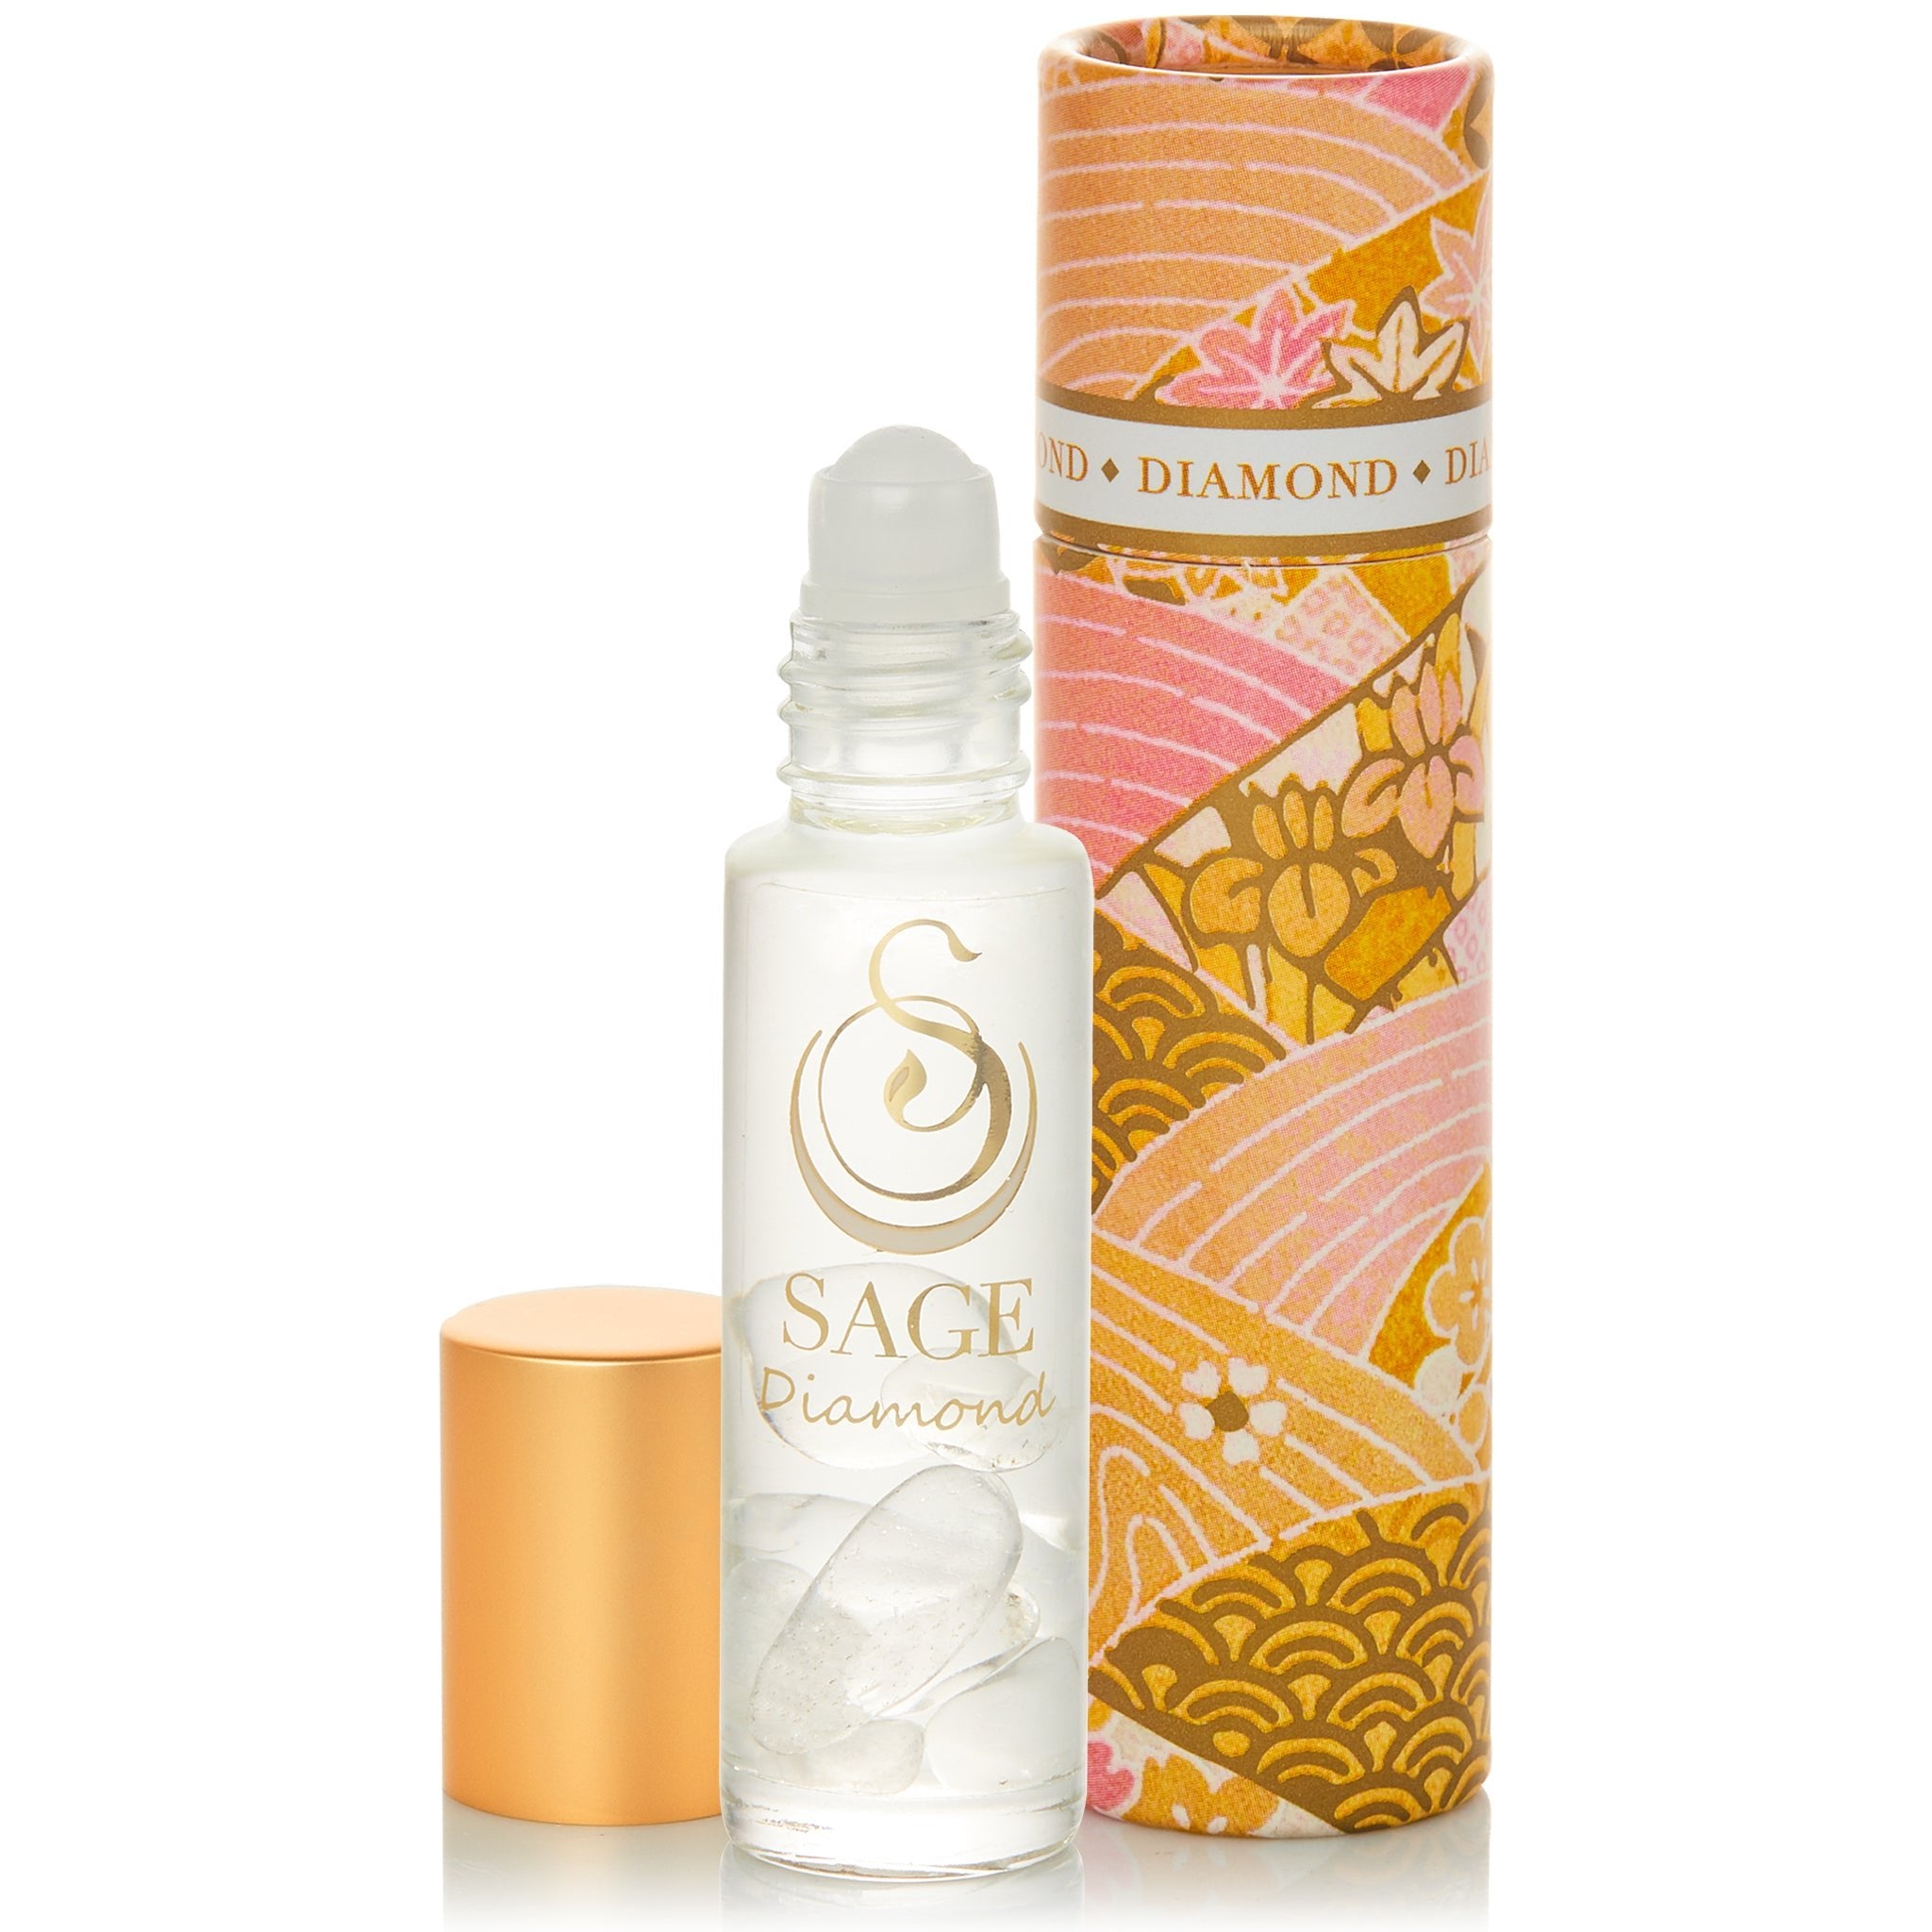 Diamond 1/4 oz Gemstone Perfume Oil Concentrate Roll-On by Sage - The Sage Lifestyle